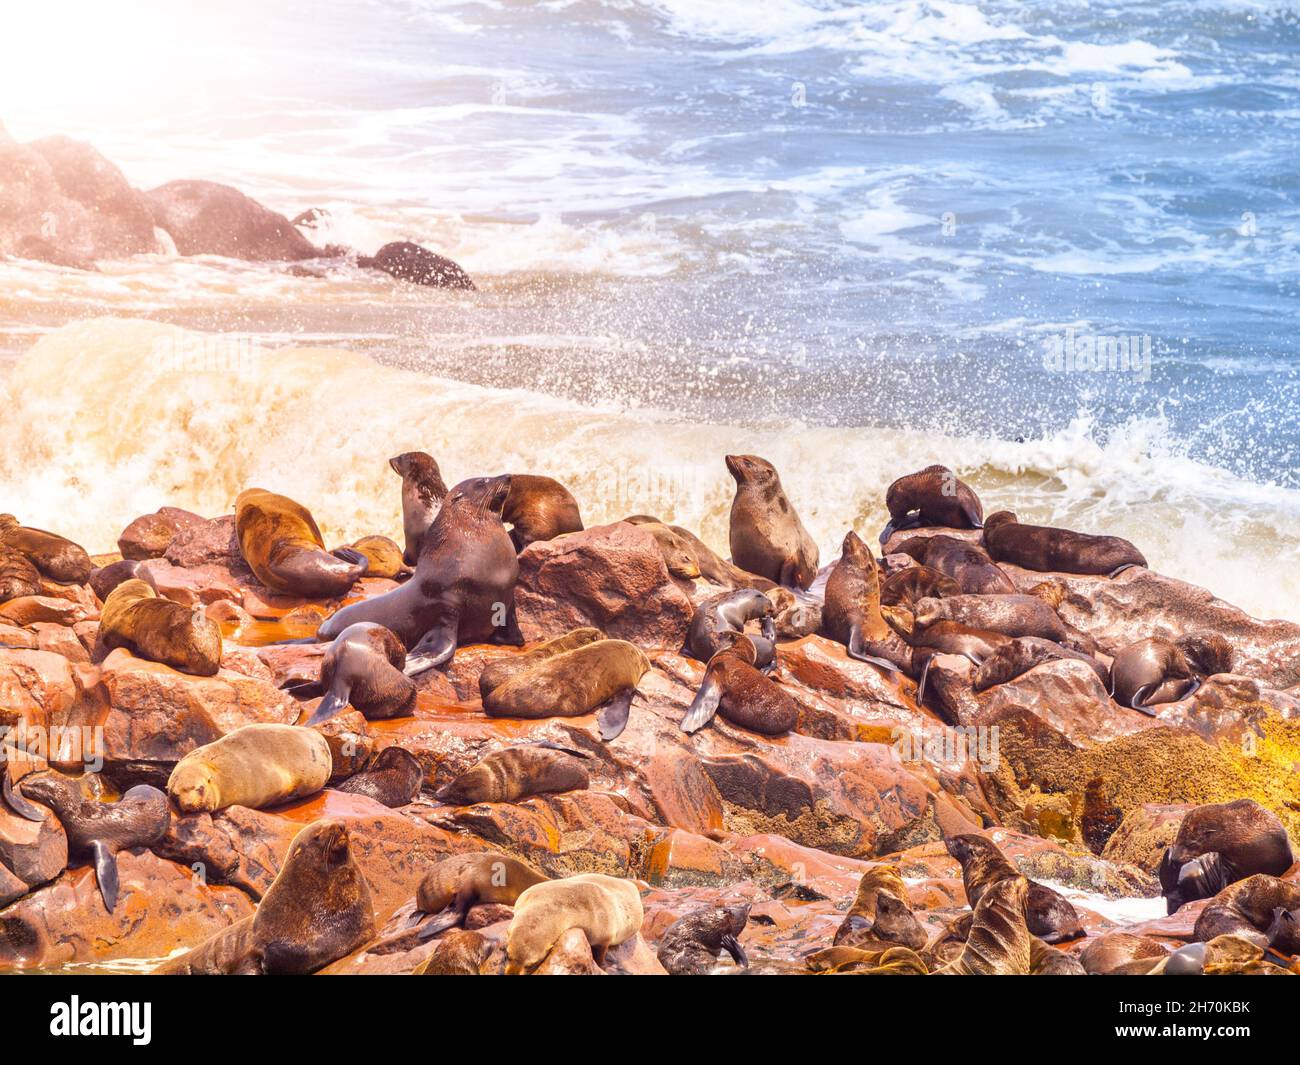 Brown fur seal colony at Cape Cross in Namibia Stock Photo